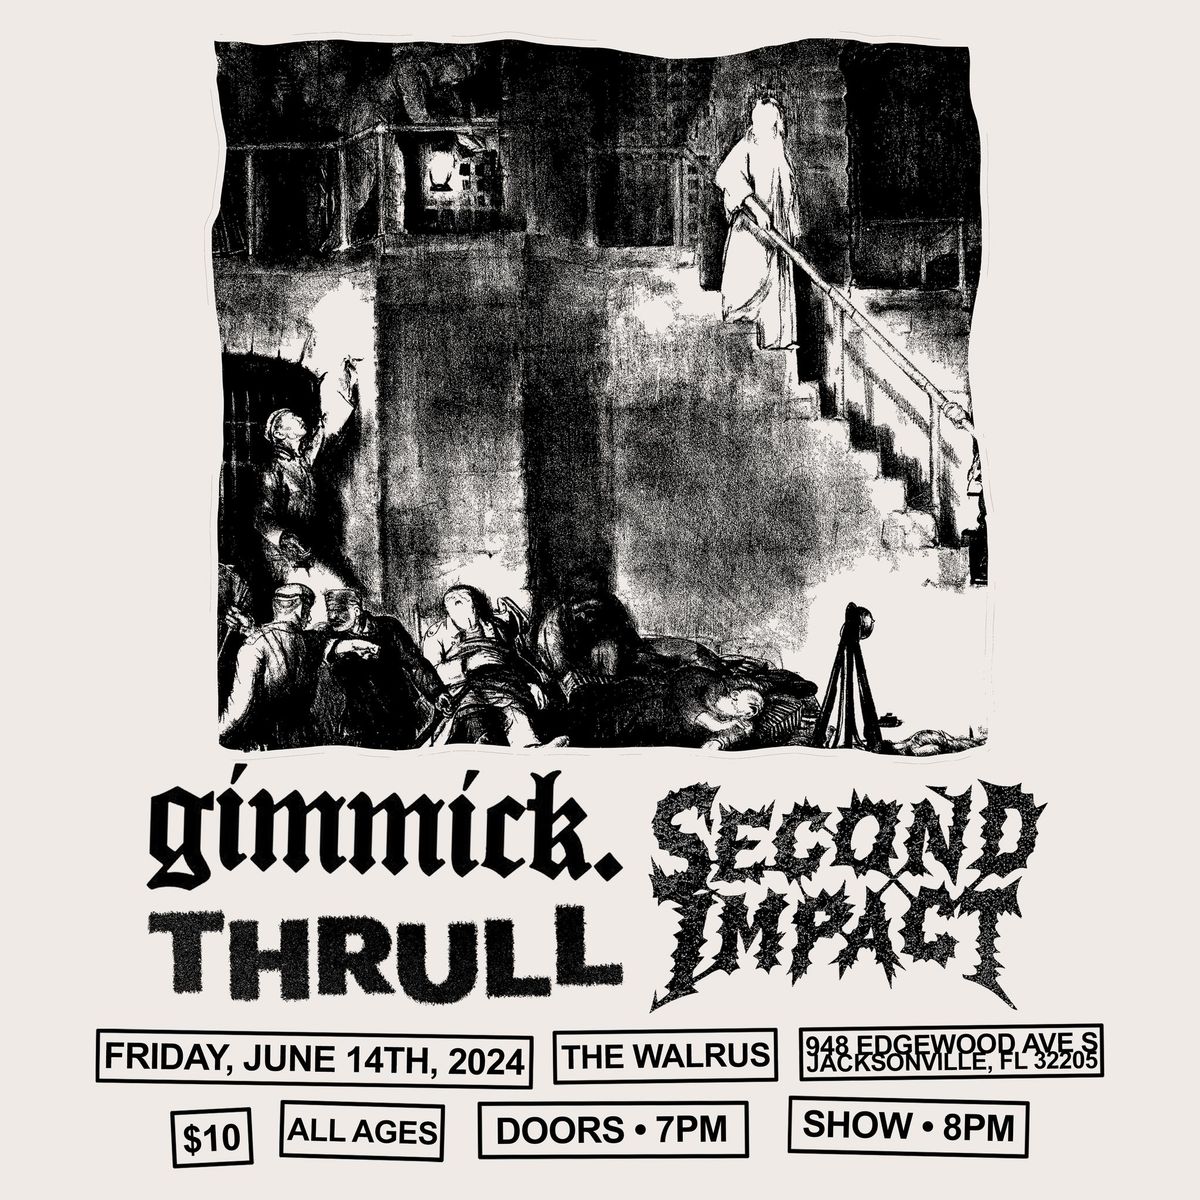 6\/14: Gimmick, Second Impact & Thrull @ The Walrus